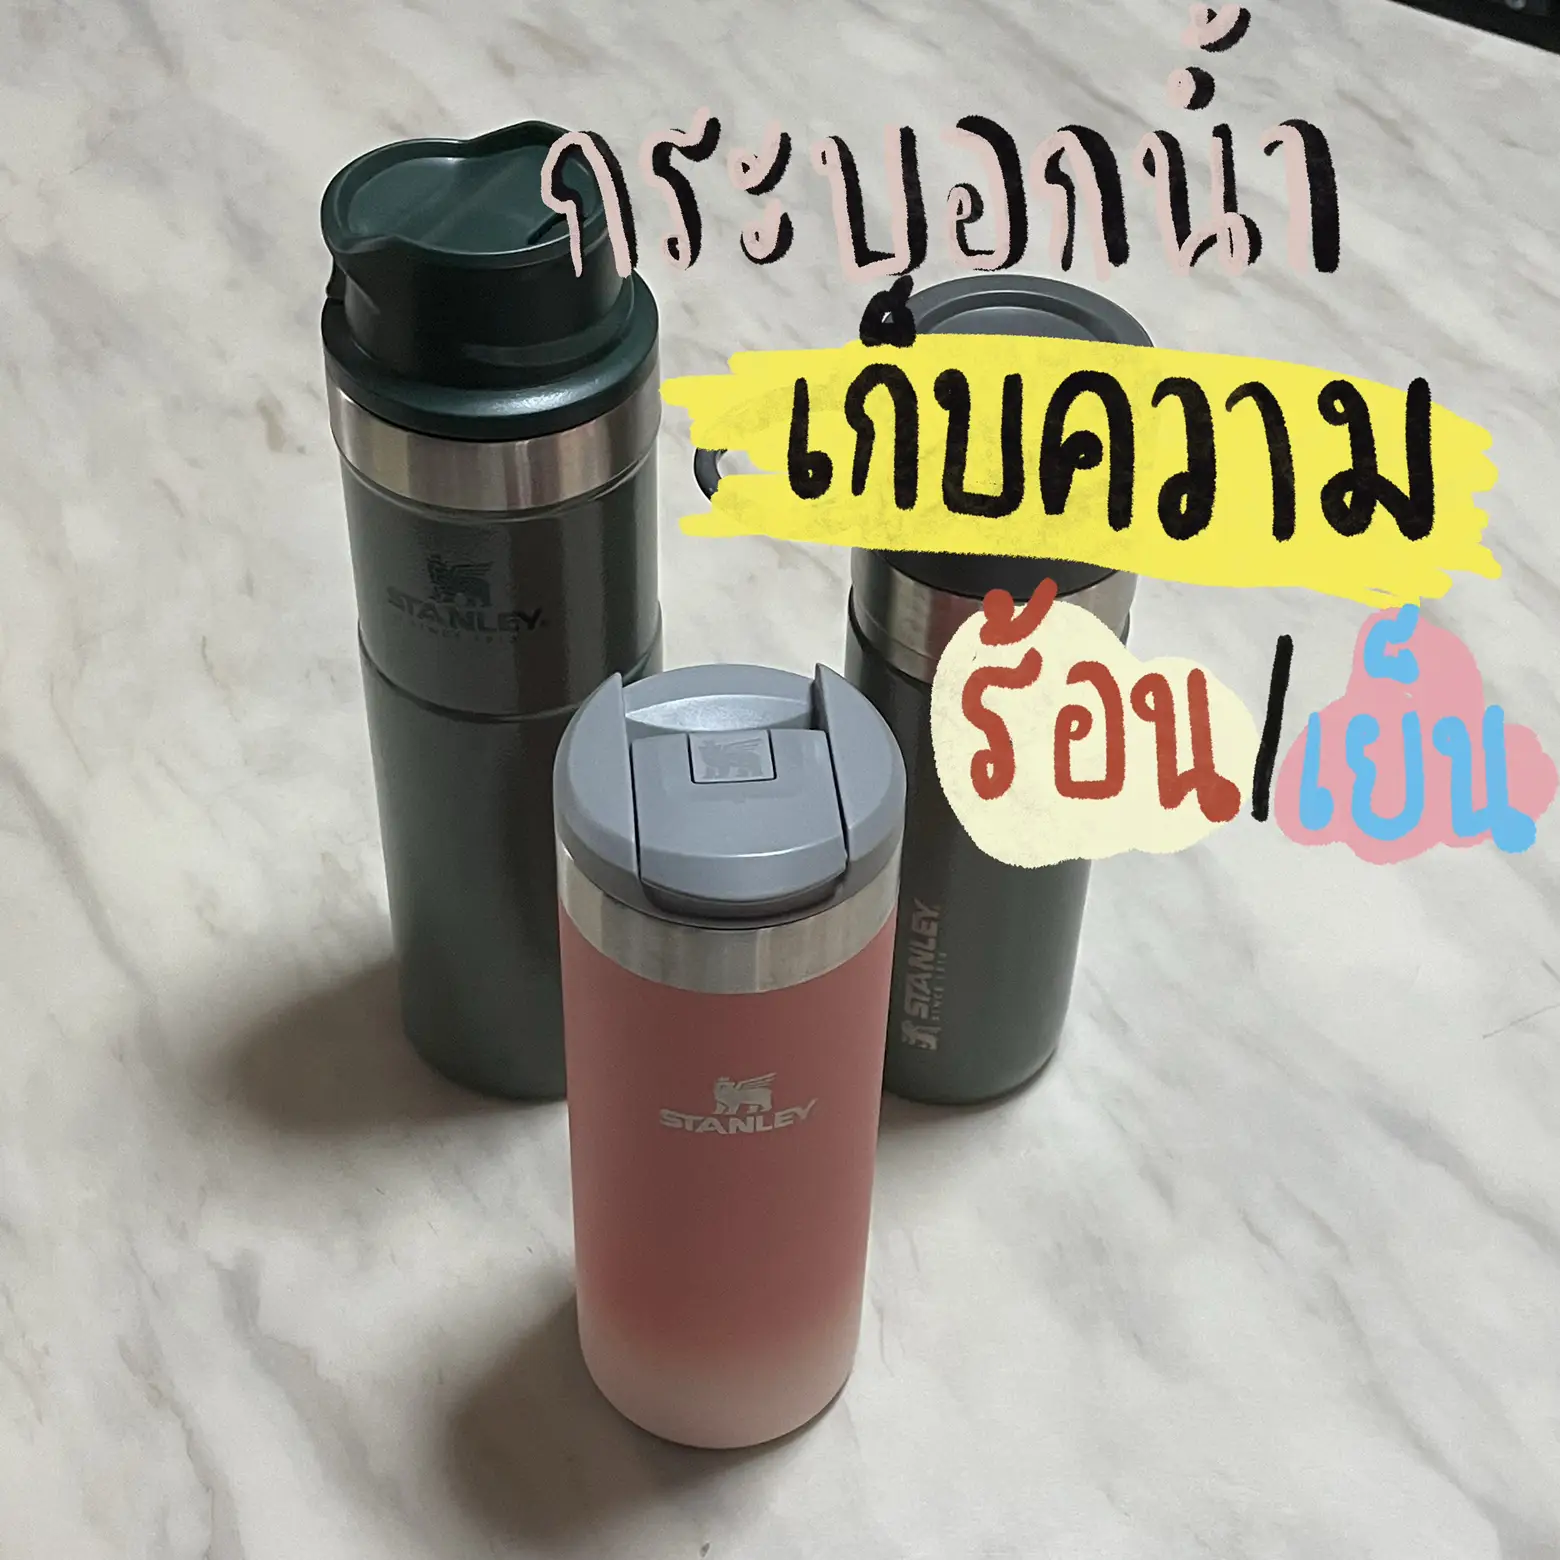 Owala water bottle, Gallery posted by Jupatchashin